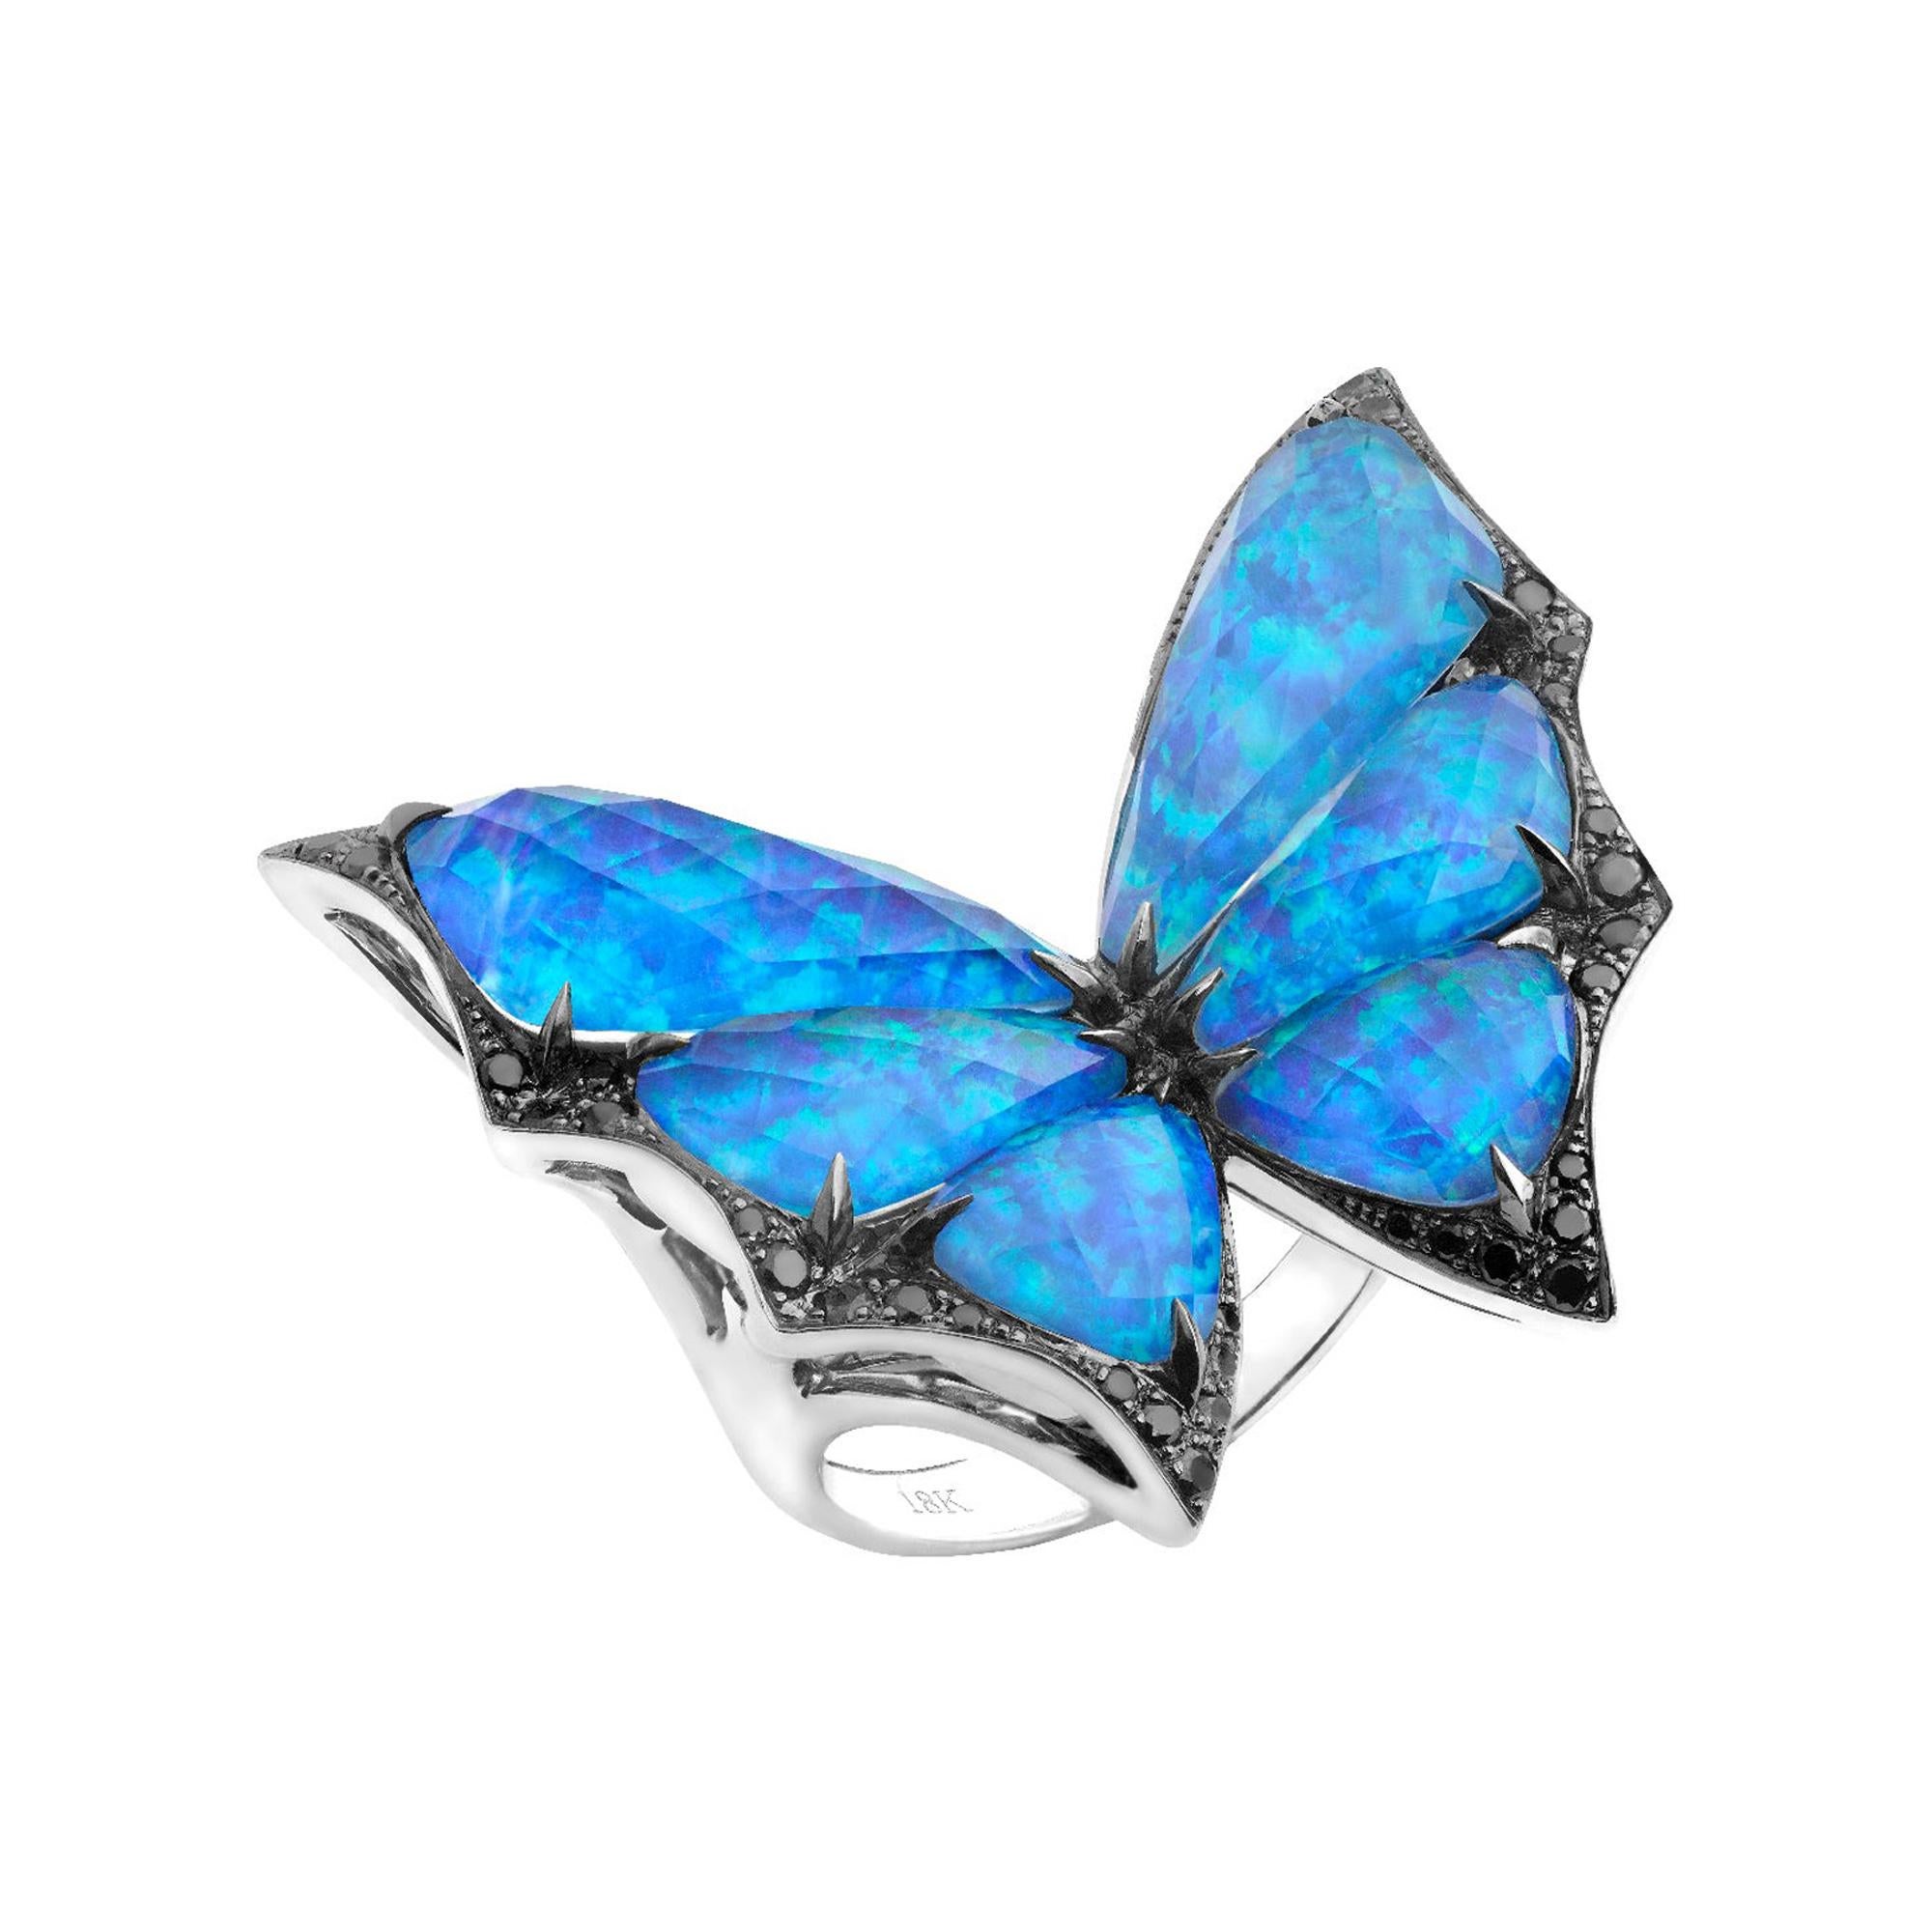 For Sale:  Stephen Webster Fly by Night Black Opalescent Crystal Haze & Diamond Large Ring